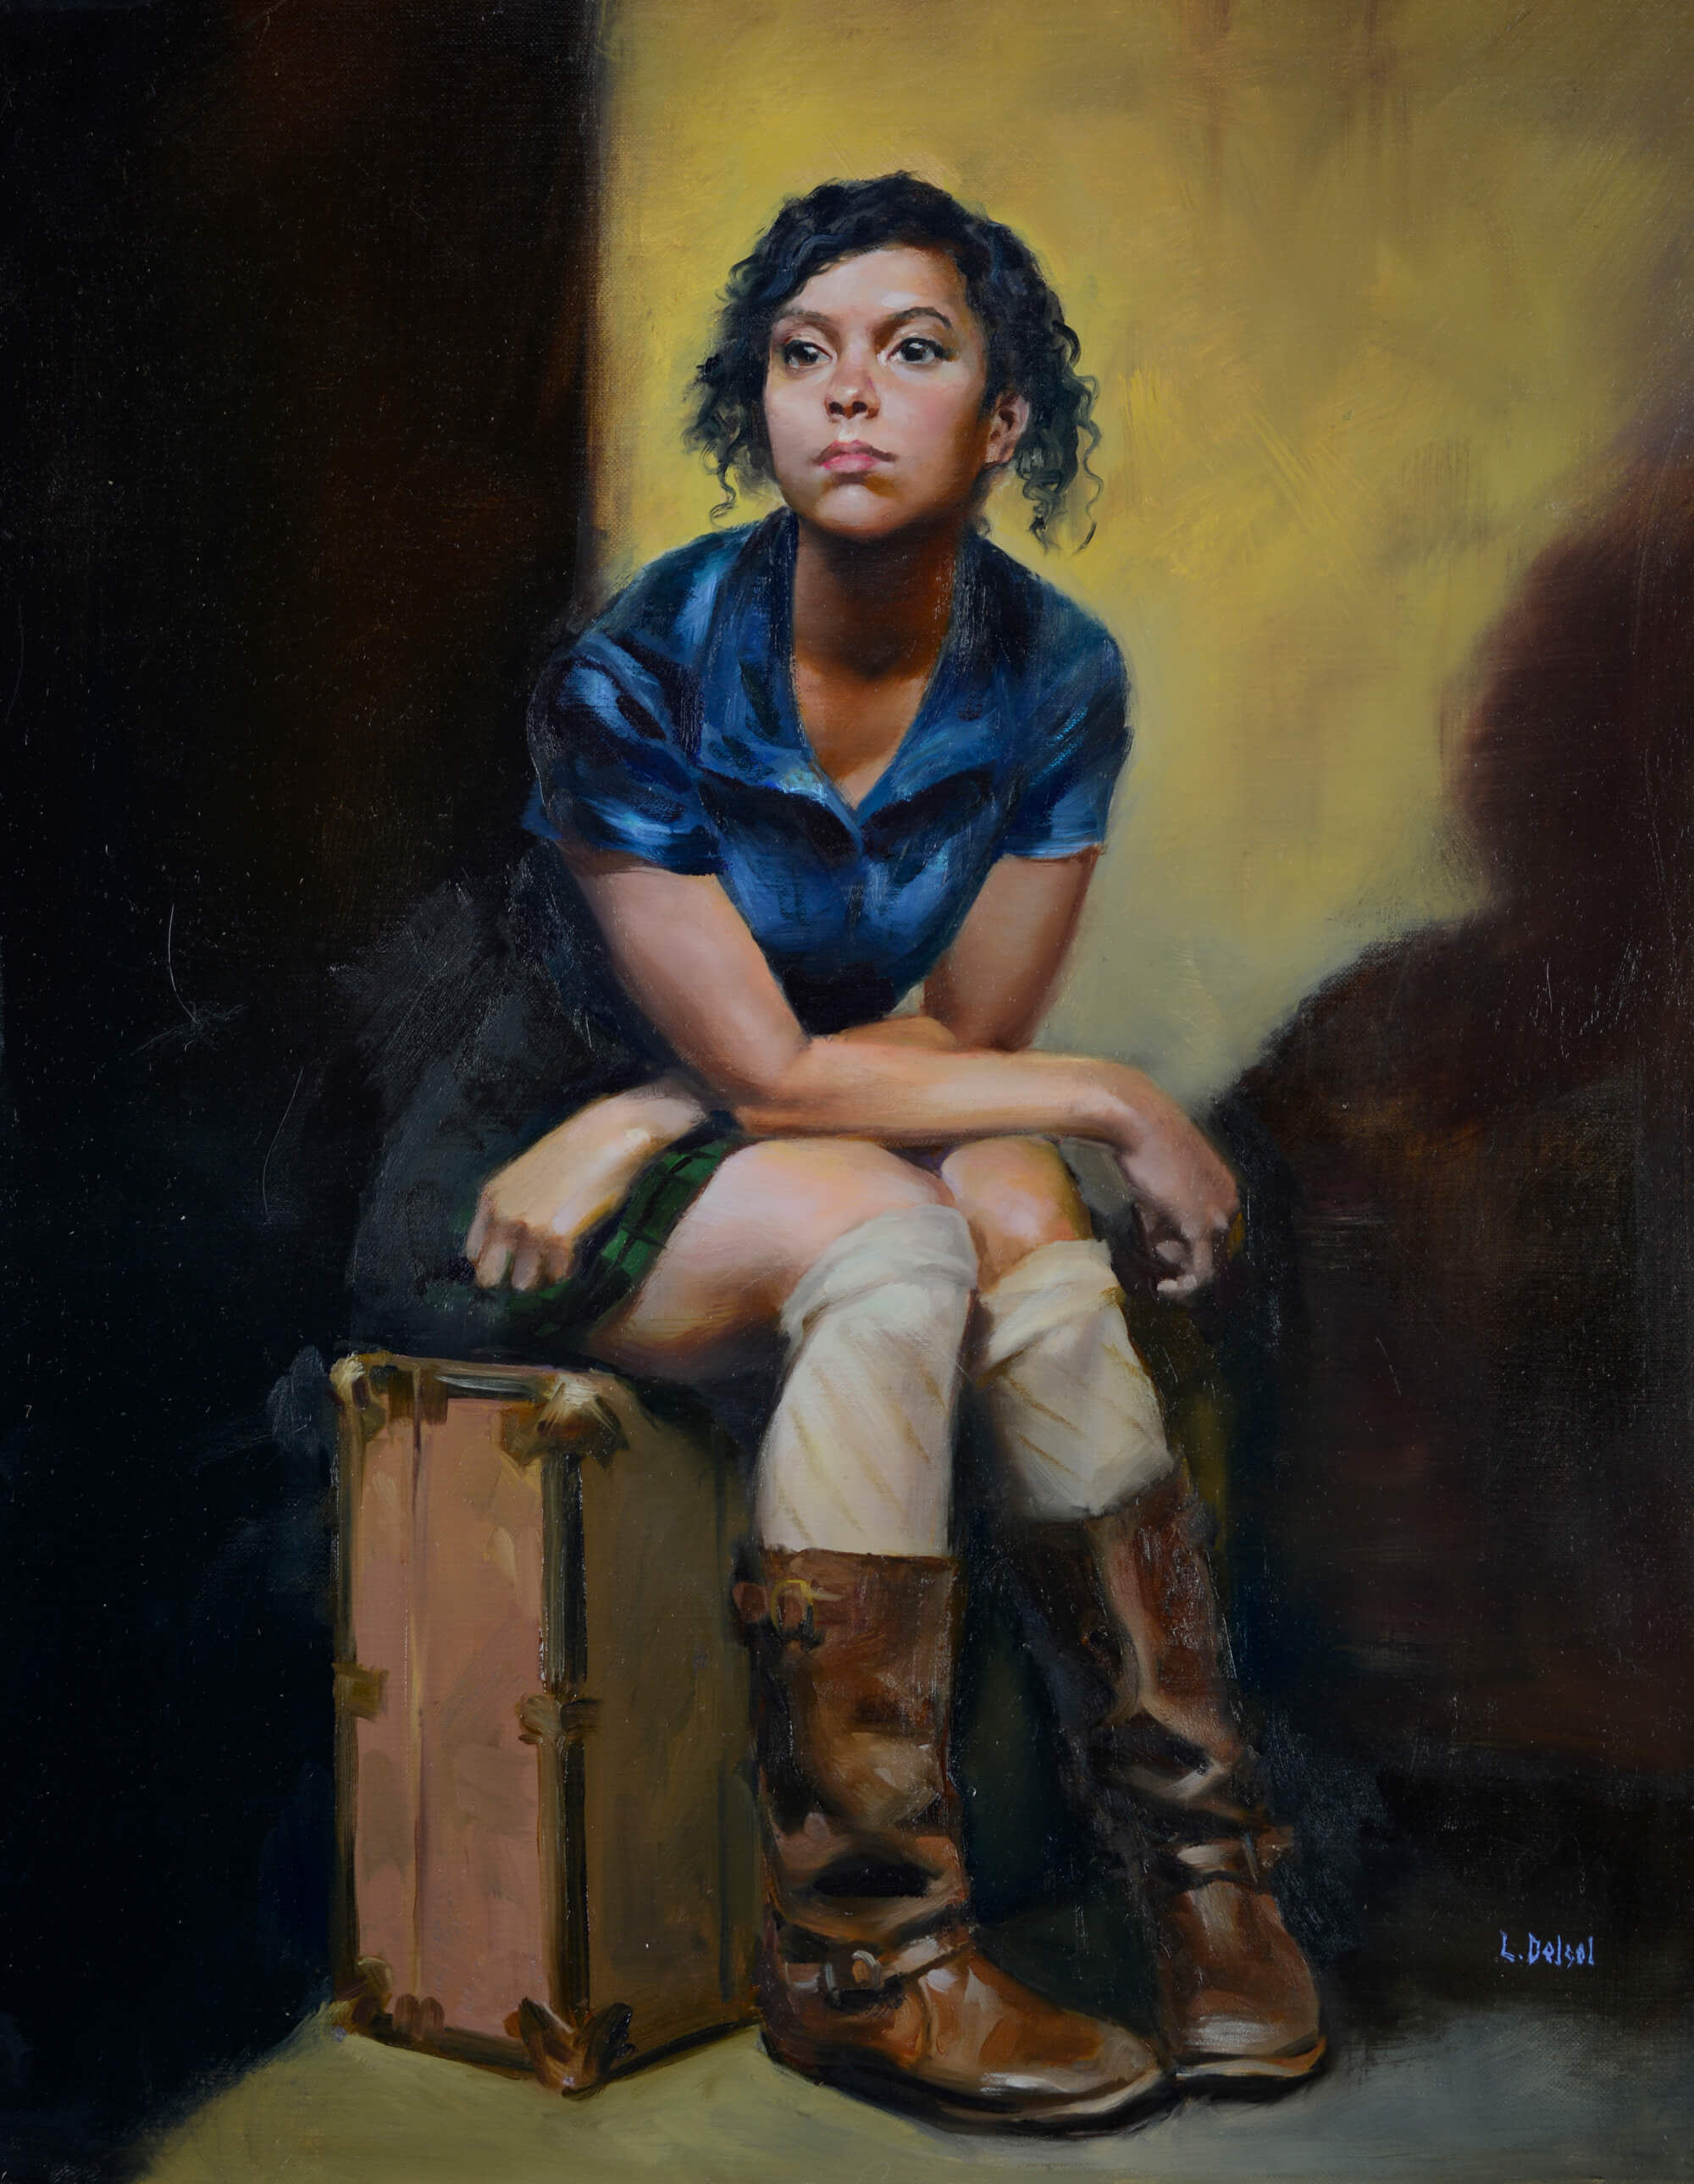 Figurative oil portrait of a young woman wearing a blue dress knee socks and boots sitting on a suitcase